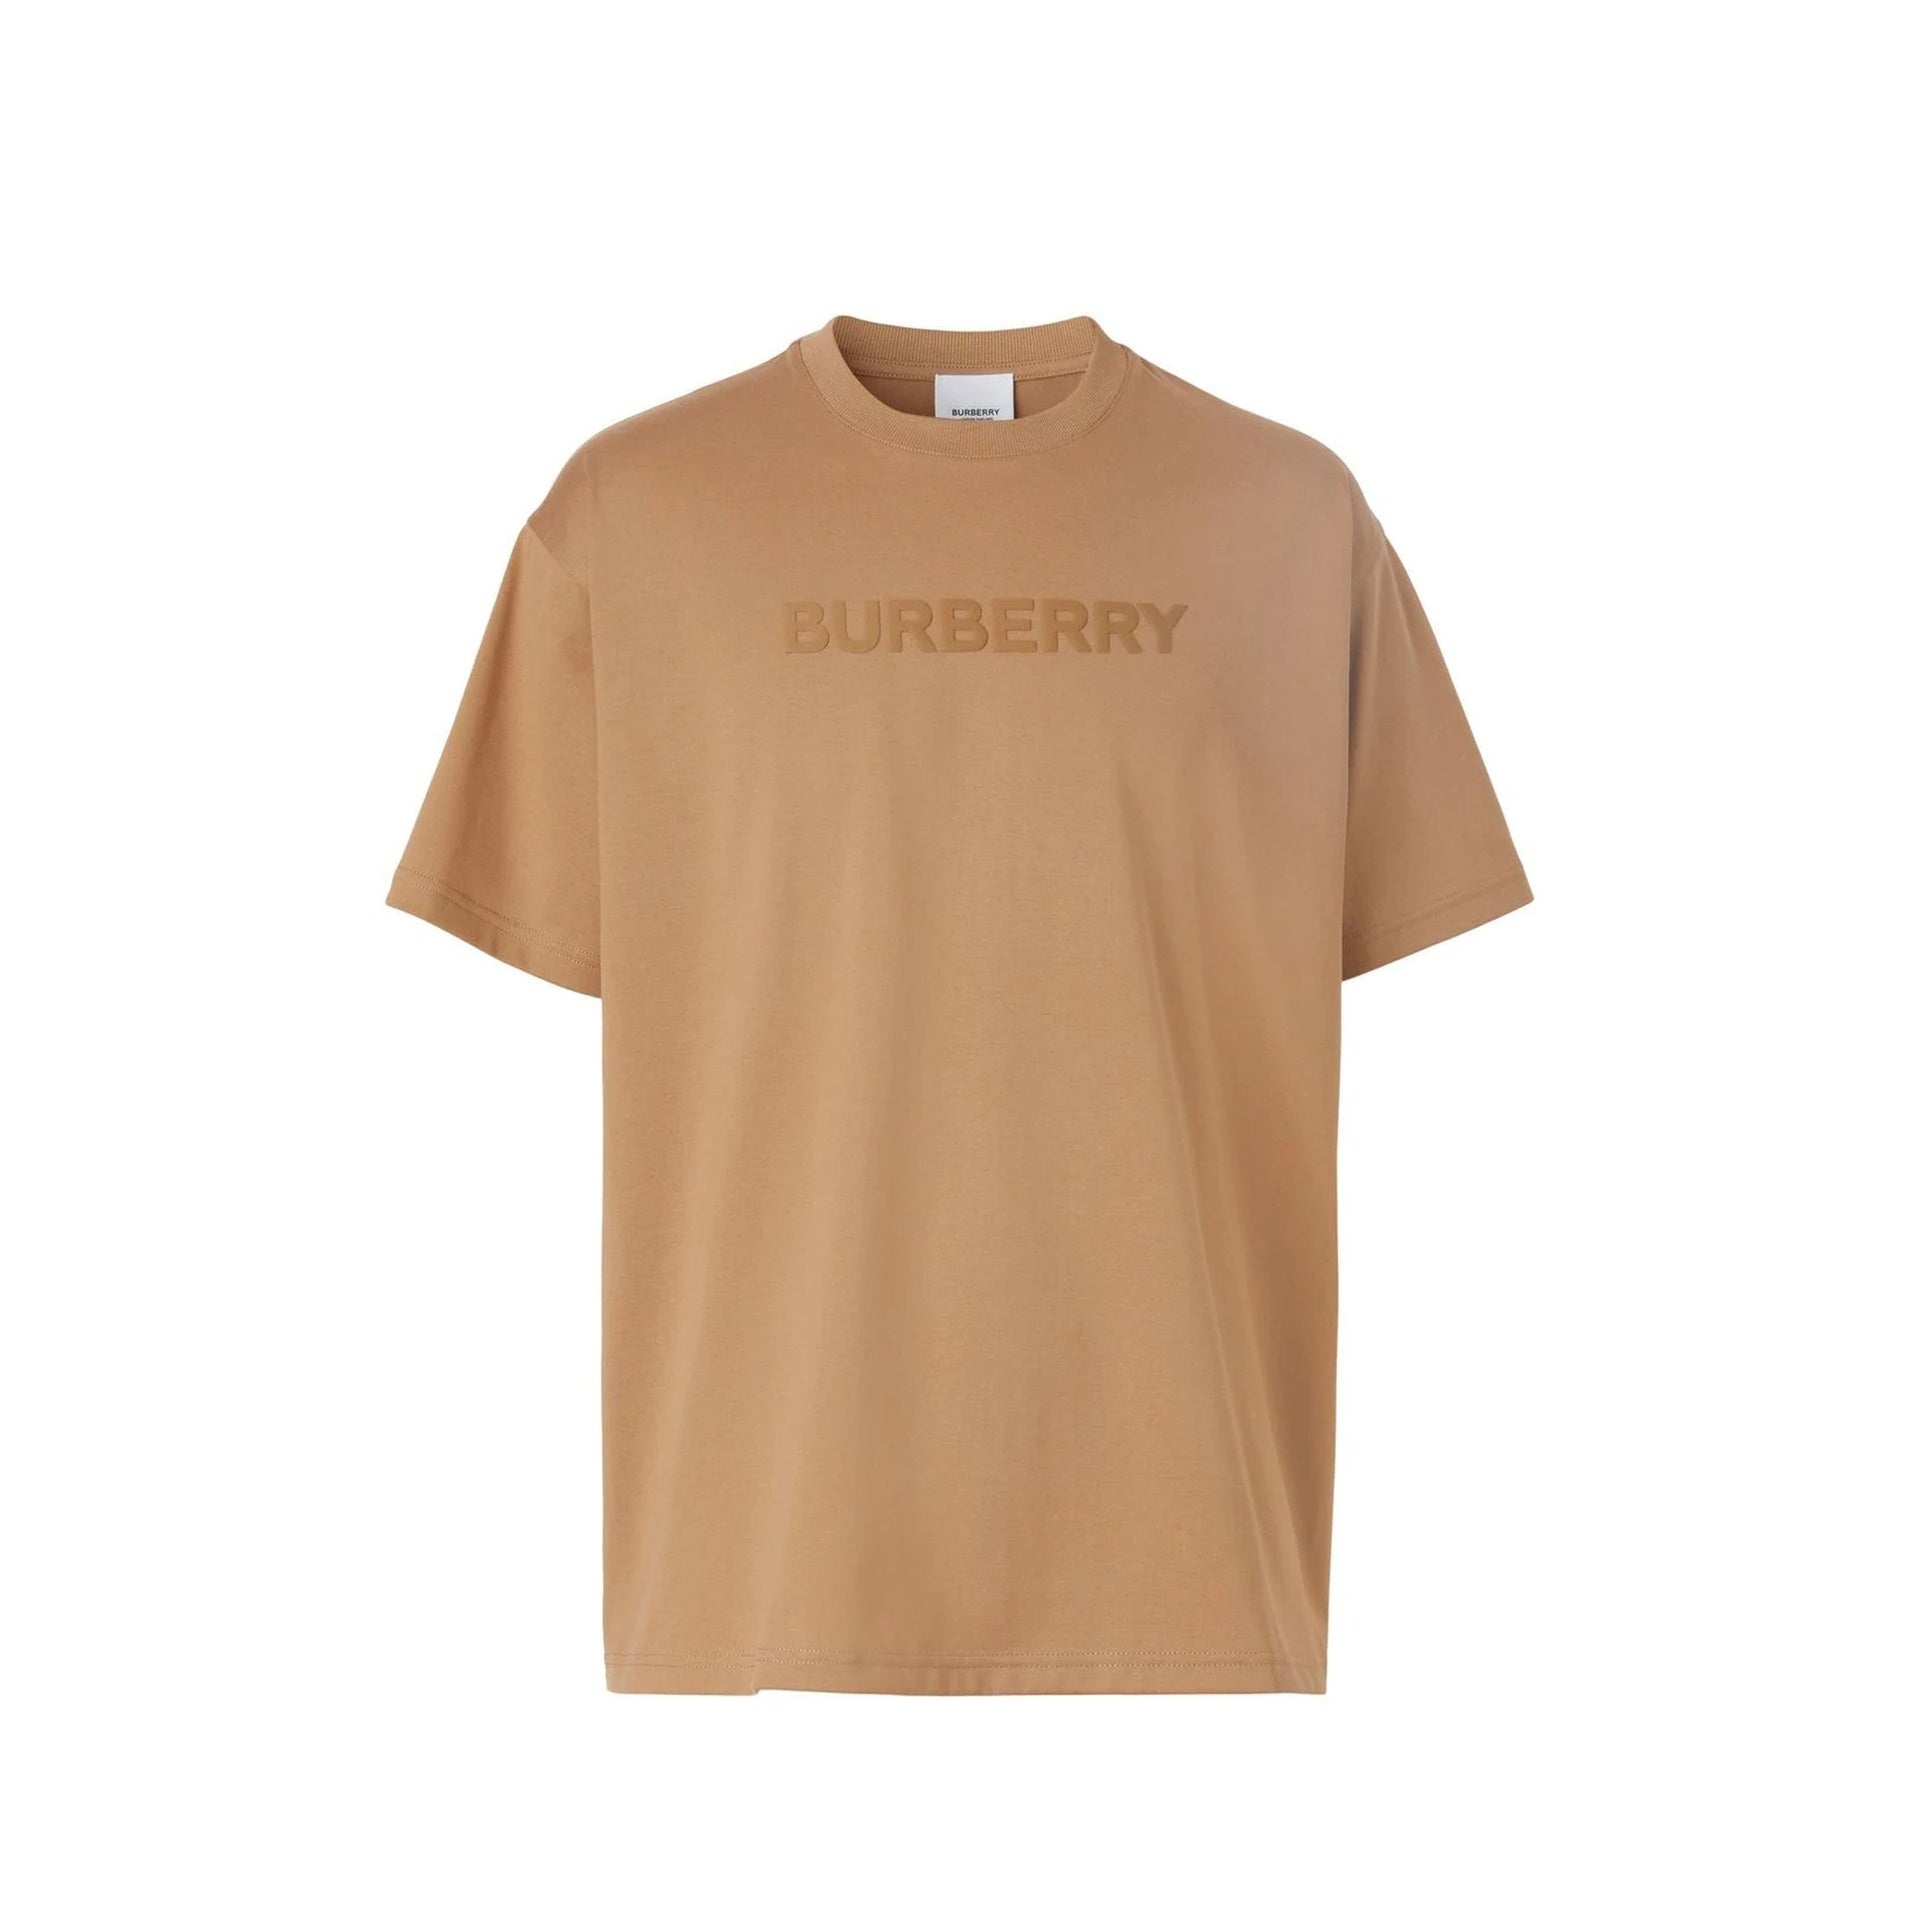 BURBERRY-OUTLET-SALE-Burberry-Harriston-Logo-T-Shirt-Shirts-BROWN-L-ARCHIVE-COLLECTION.jpg